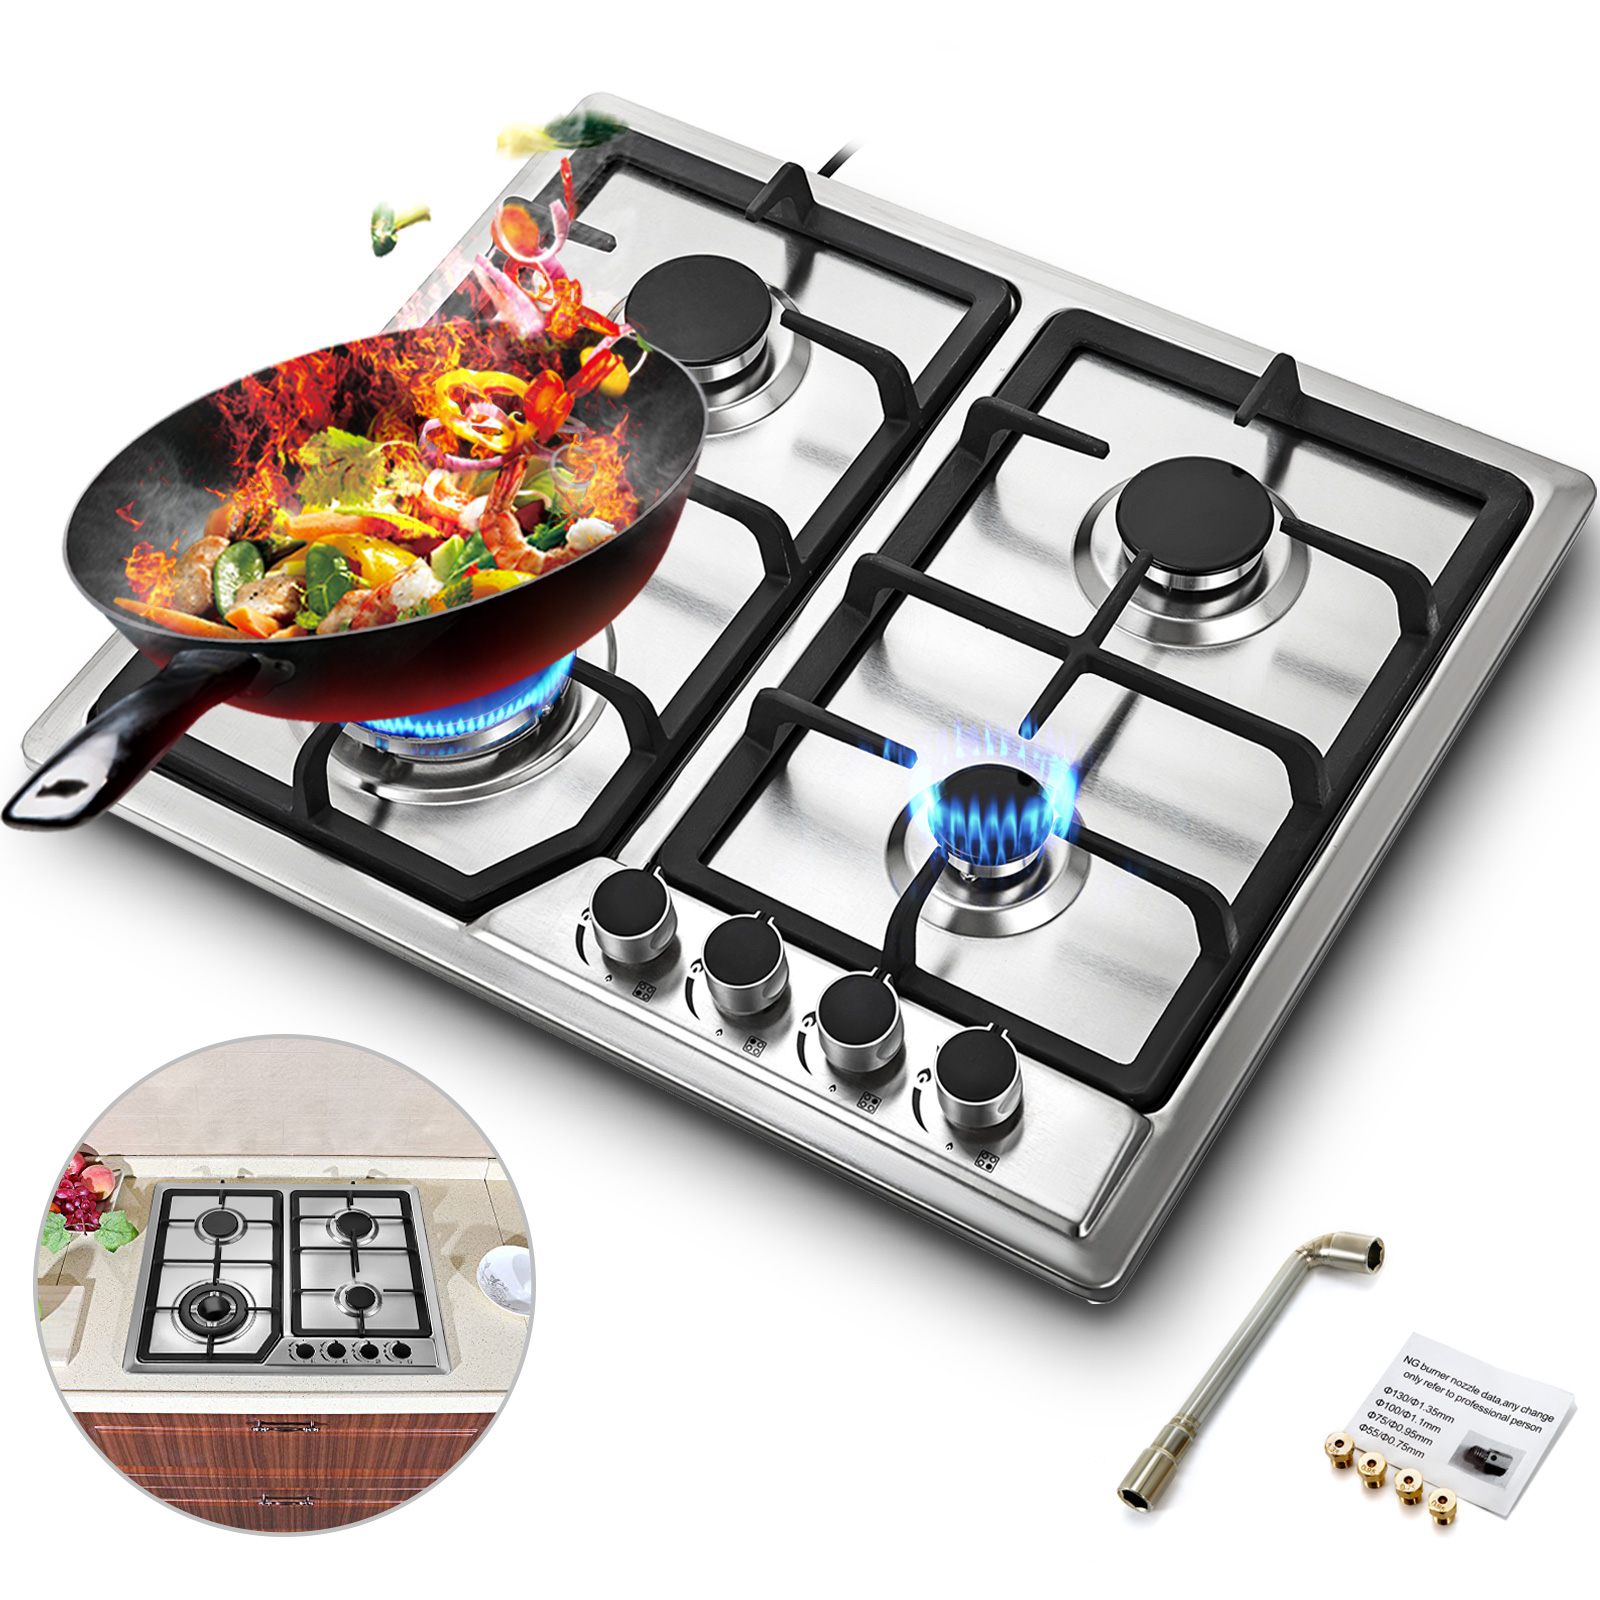 22 8inch Gas Cooktop Gas Hob 4 Burners Lng Lpg Cooker Iron Frame